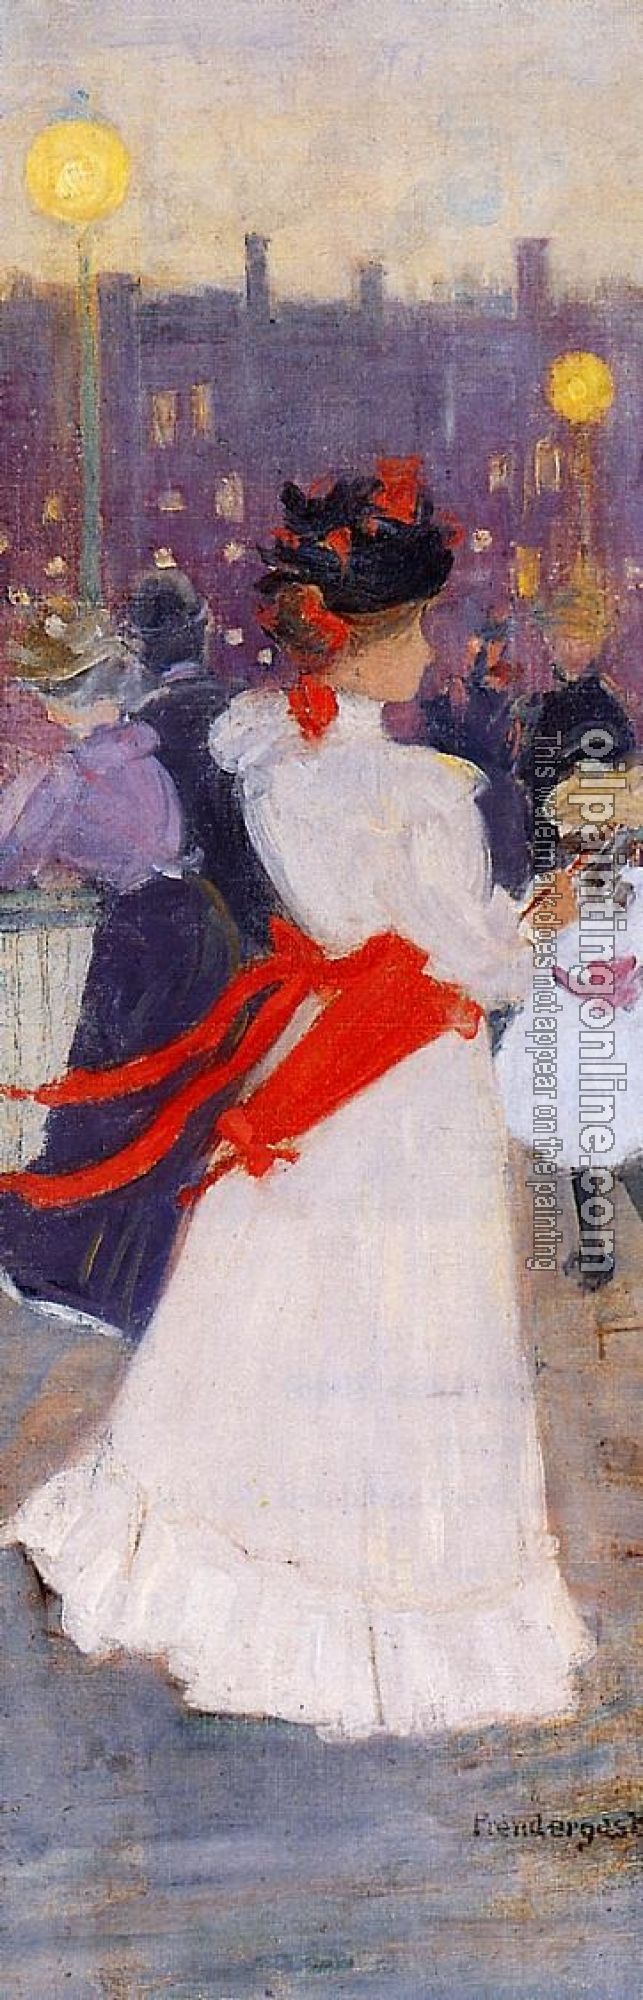 Prendergast, Maurice Brazil - Lady with a Red Sash